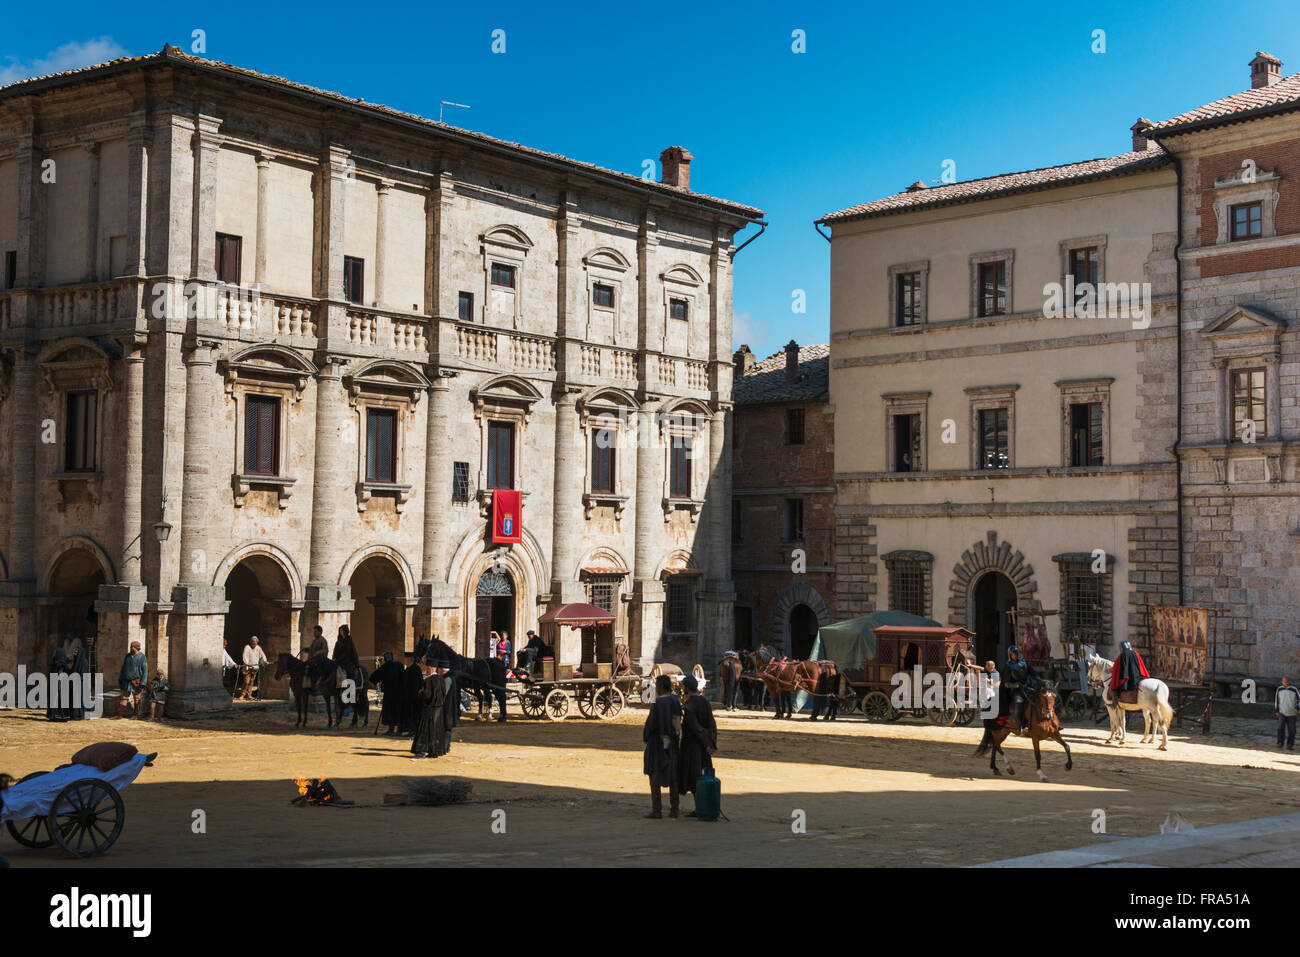 Pedestrians and horseback riders in a town square; Montepulciano, Toscana, Italy Stock Photo